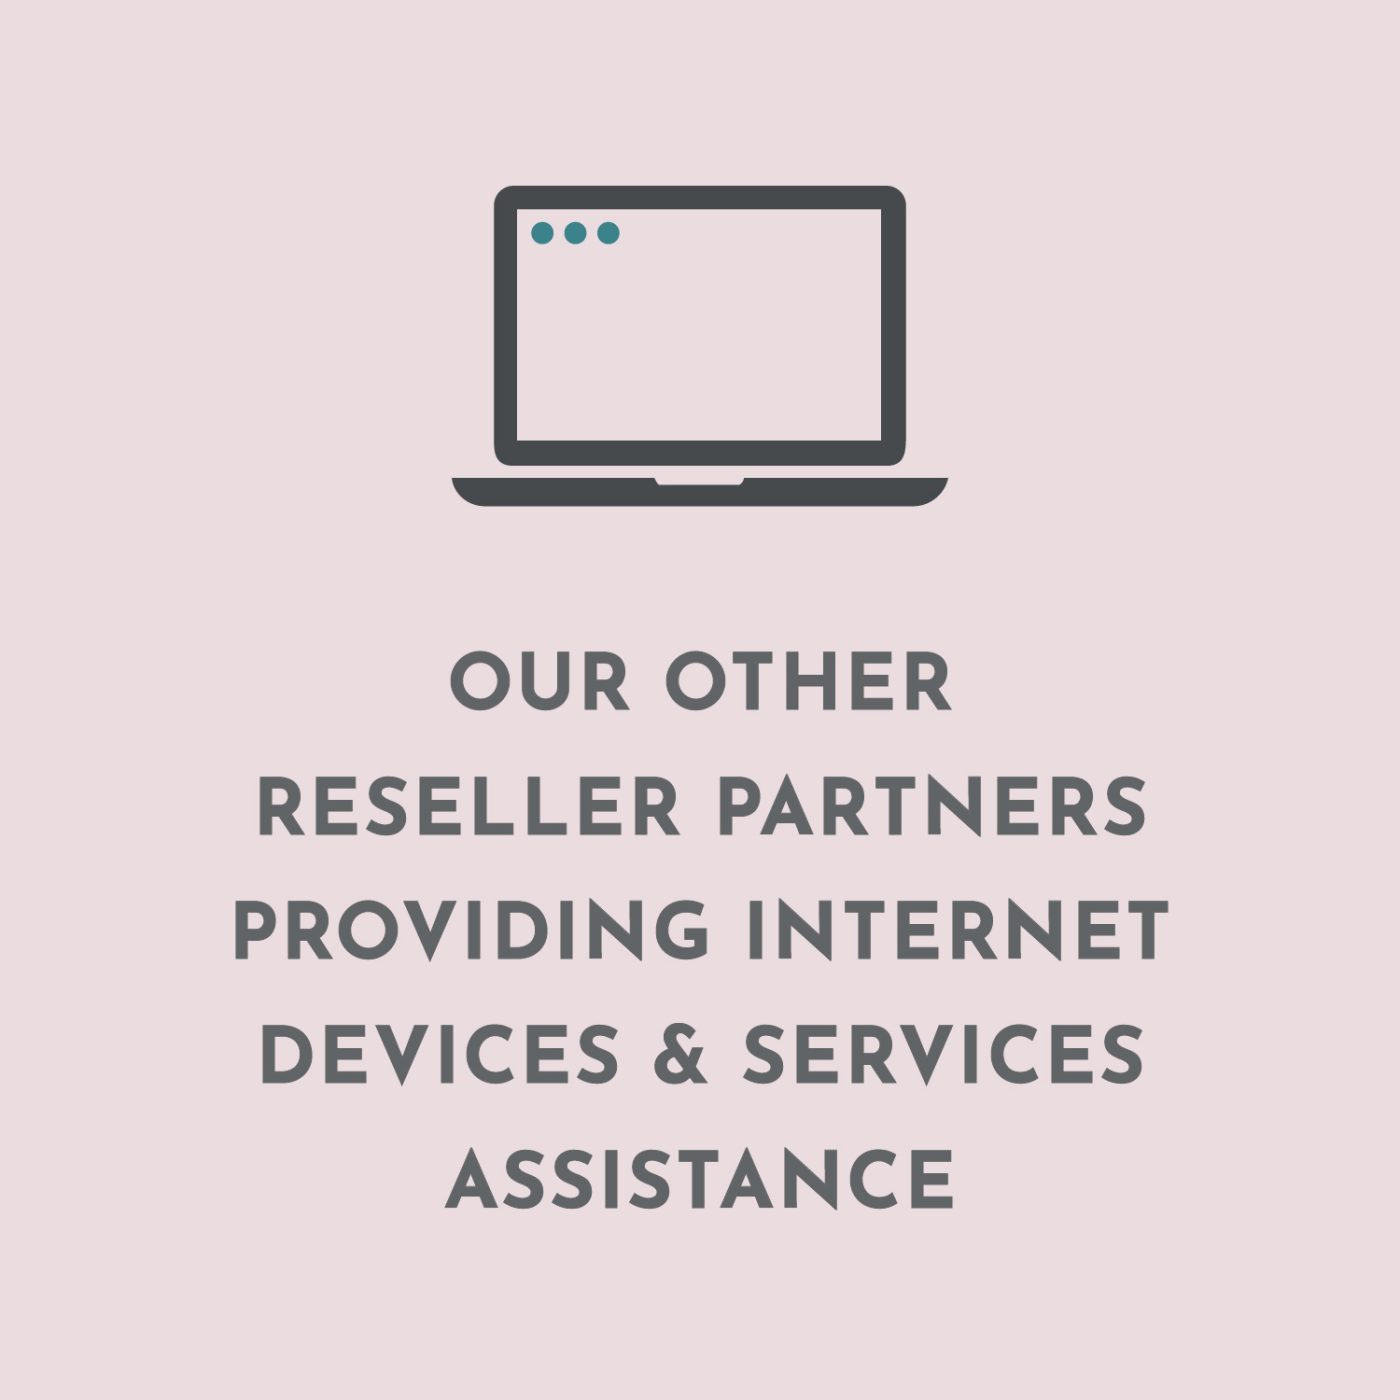 Infographic that shows a laptop icon on top of text "Our other reseller partners providing internet devices & services assistance"